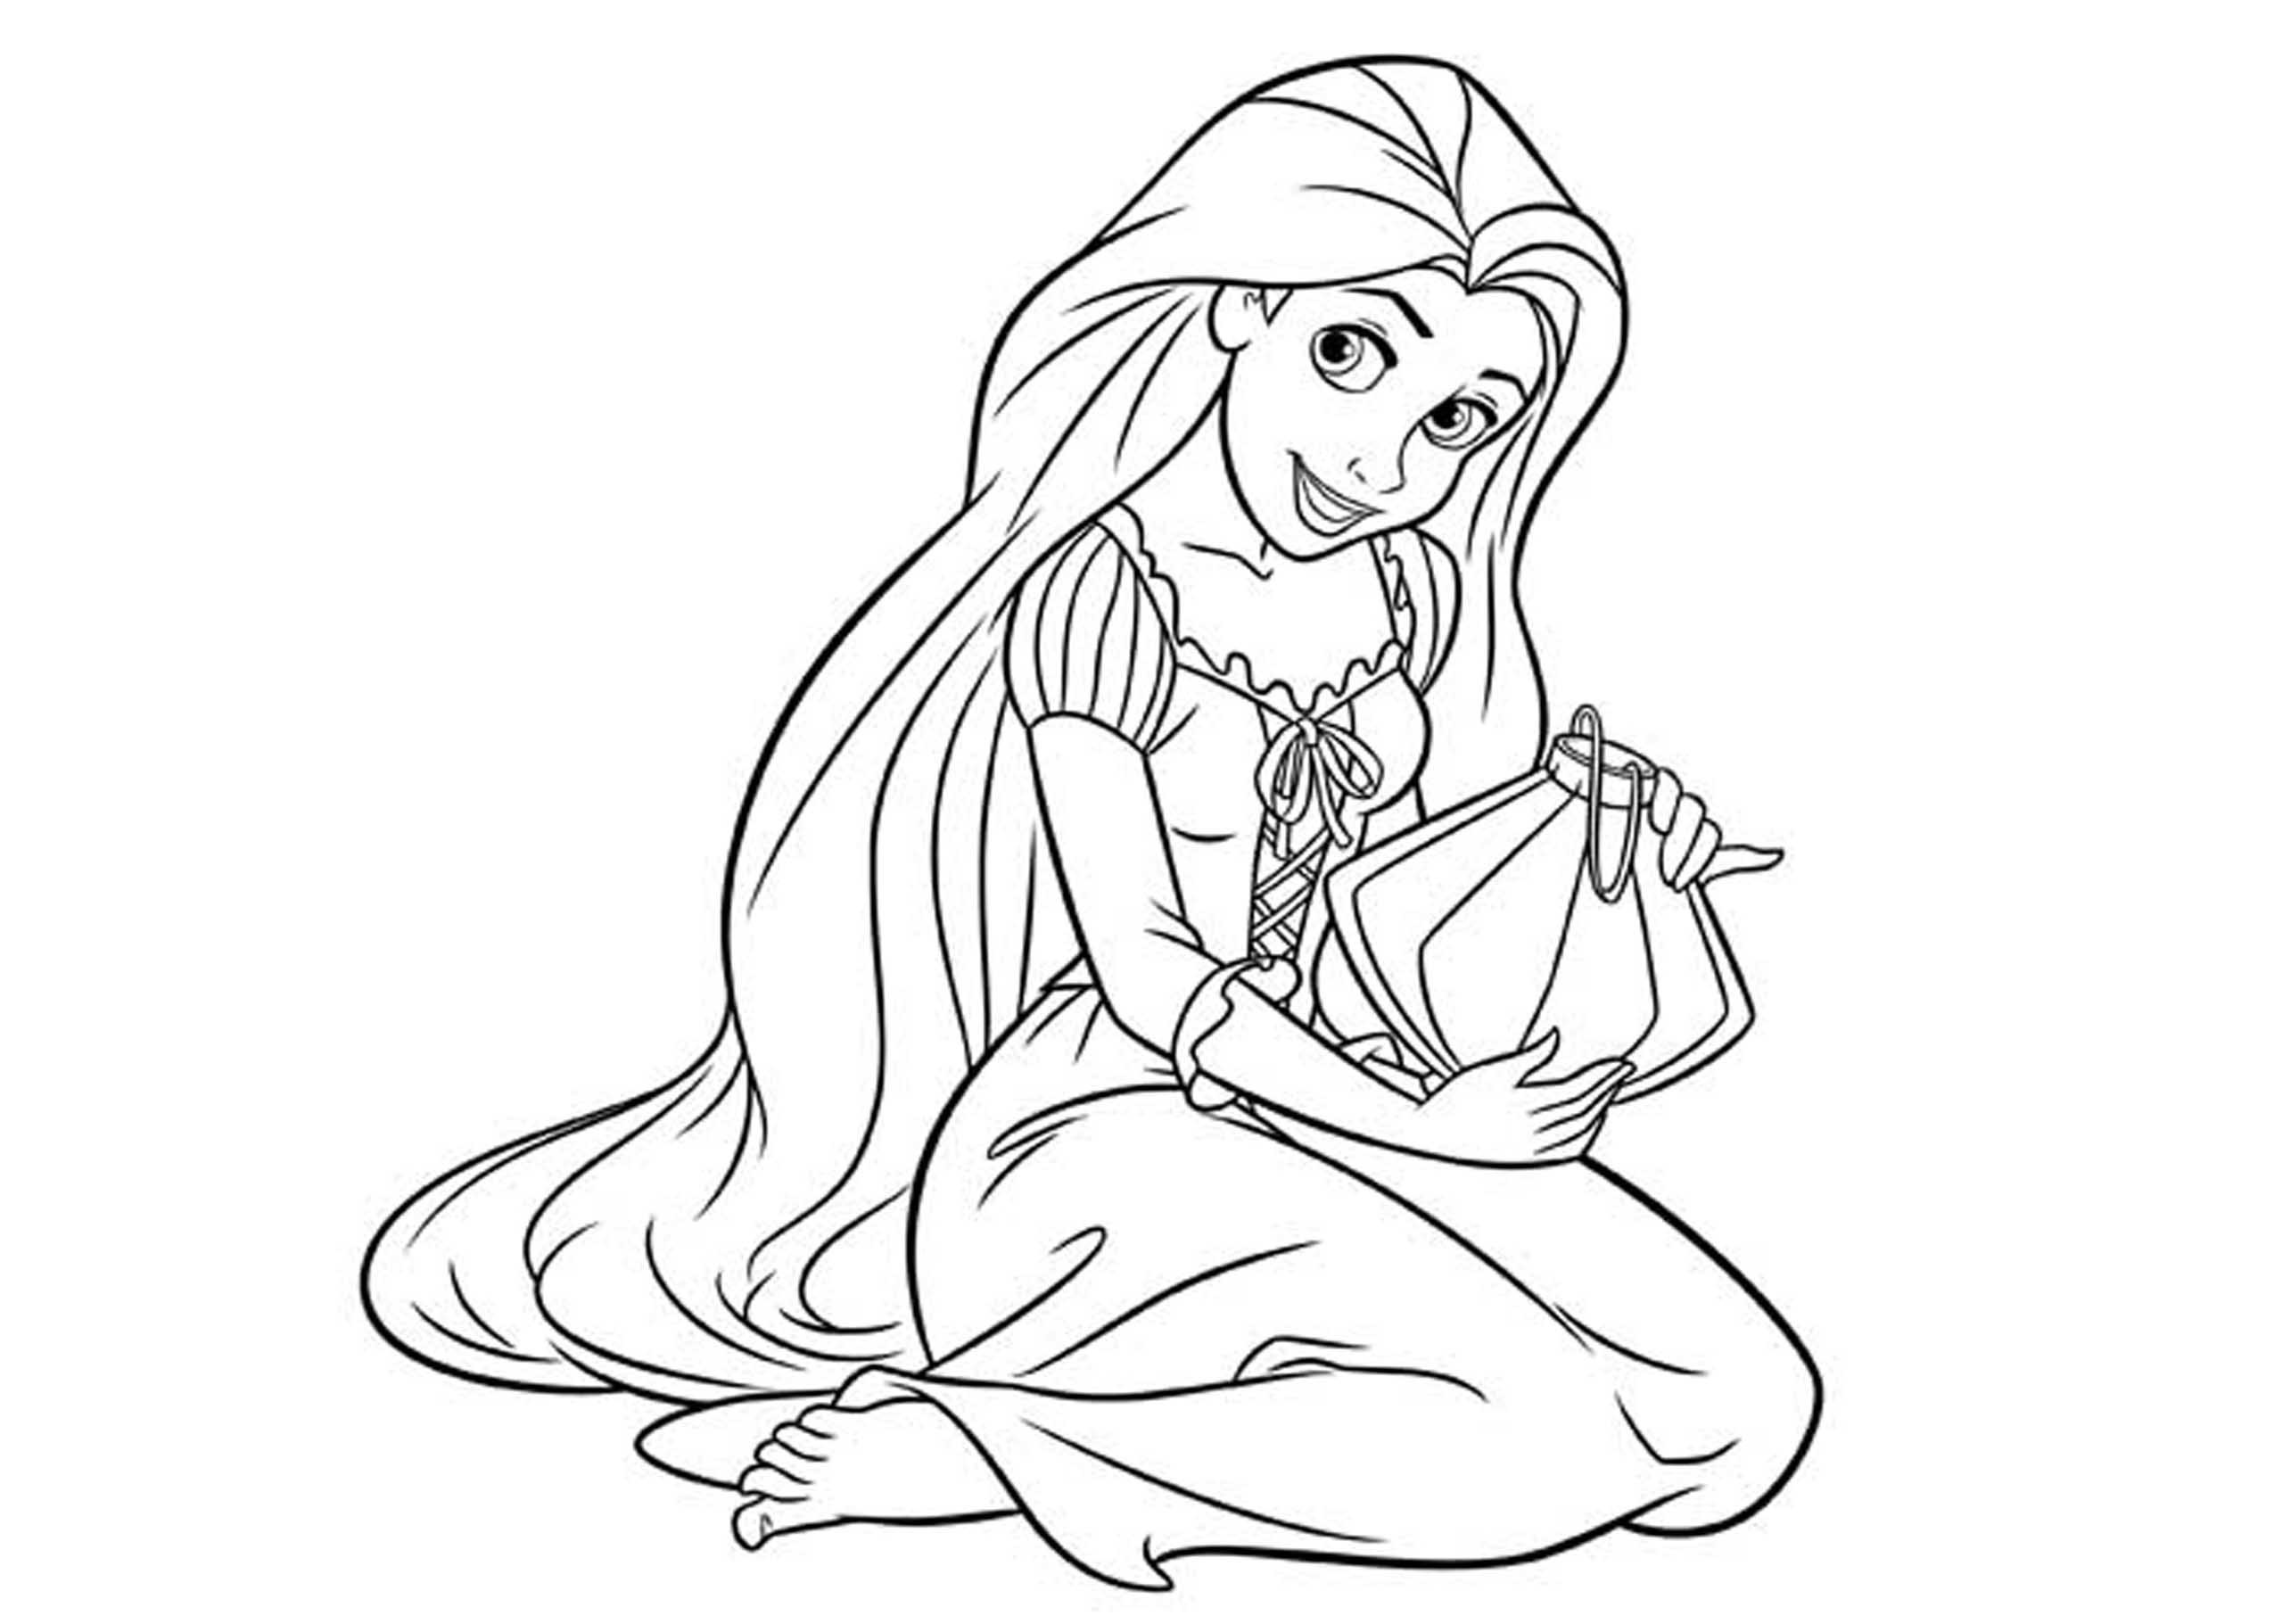 Disney Princess Coloring Pages and Activities Wallpaper